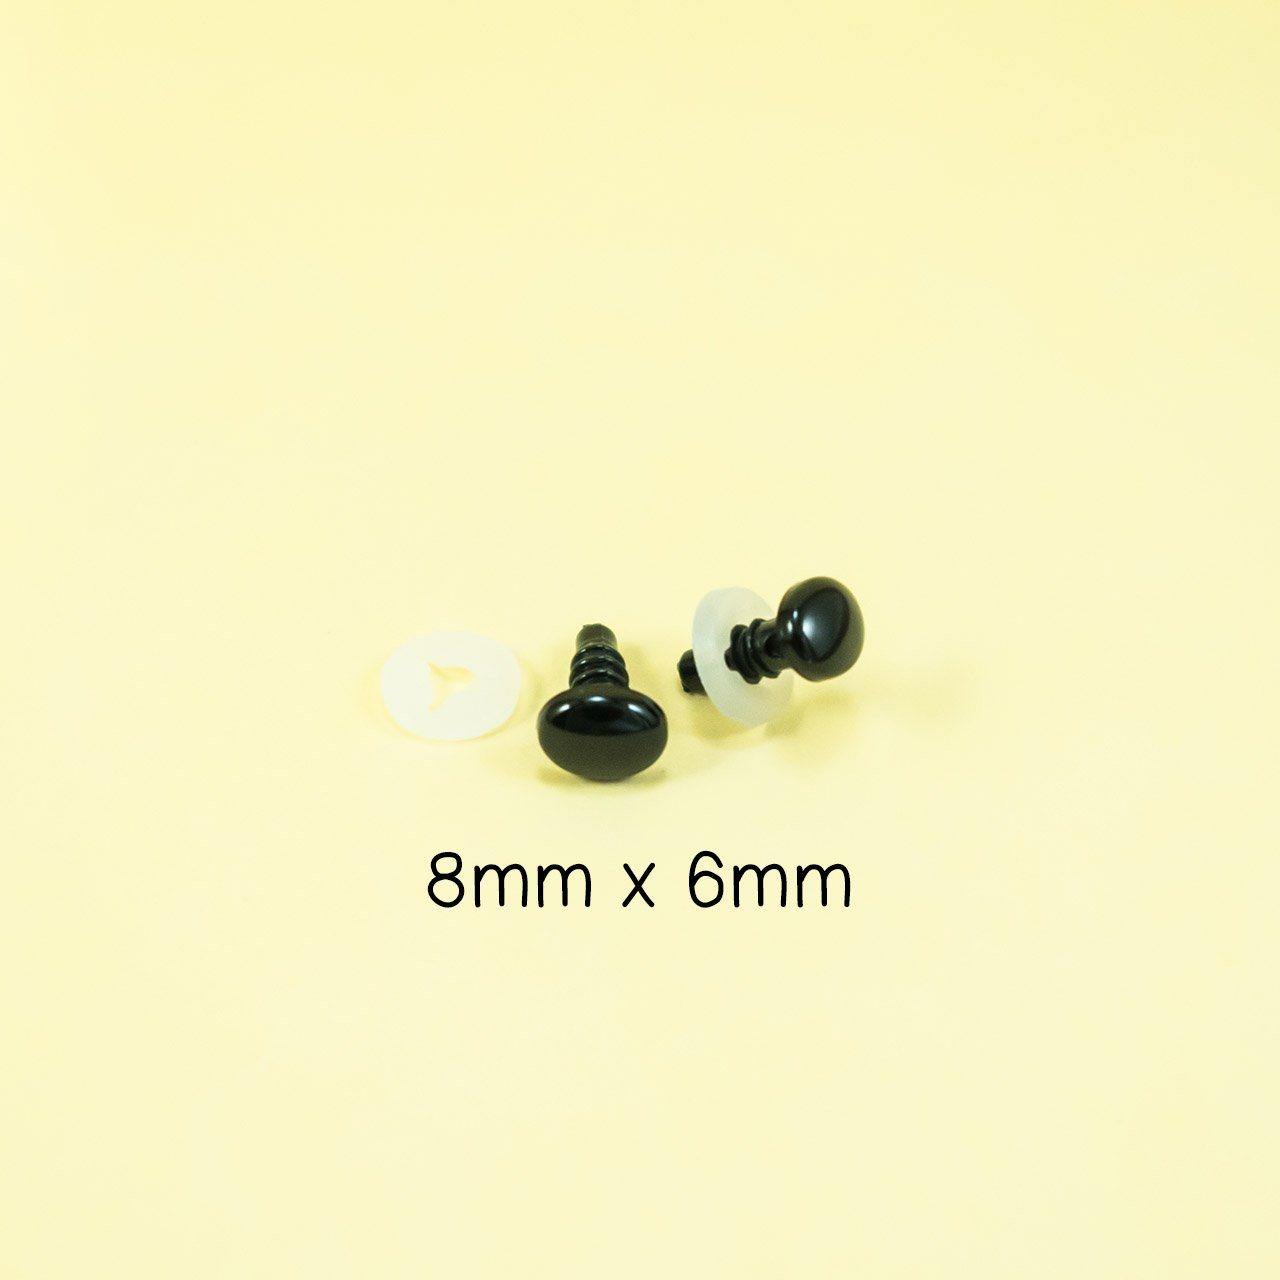 8mm x 6mm oval safety eyes